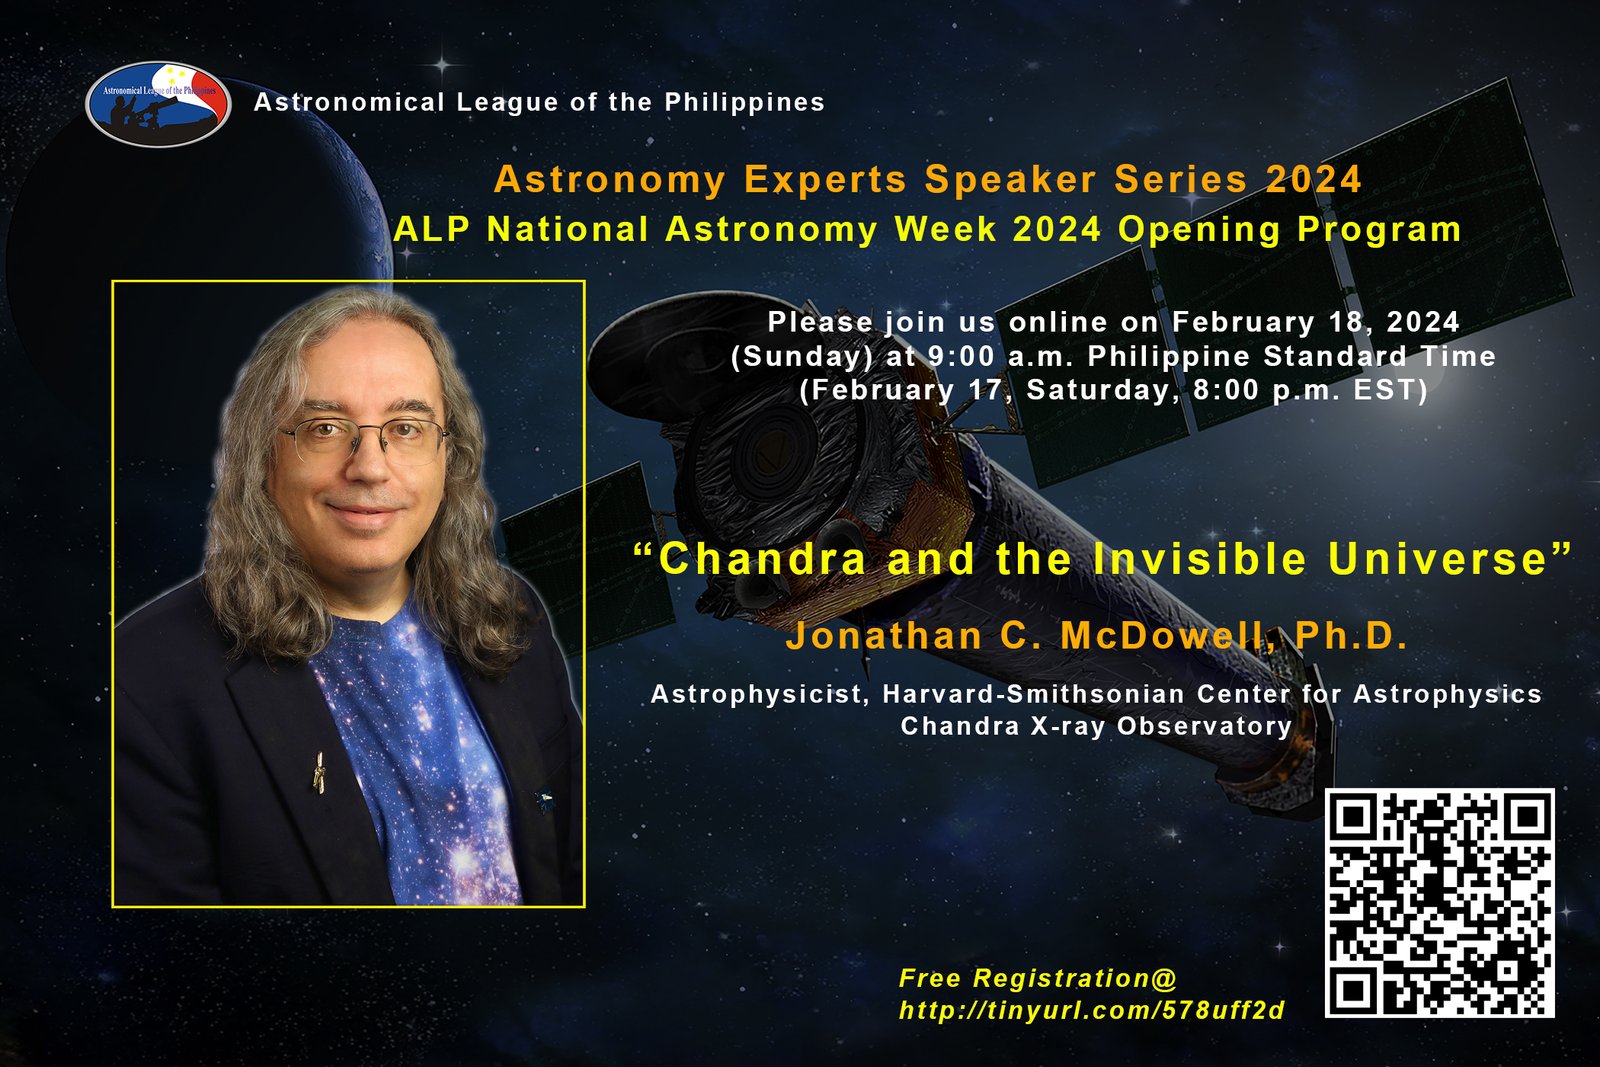 February 18, 2024 ALP Astronomy Experts Speaker Series 2024 featuring Dr. Jonathan C. Mc Dowell, PHD